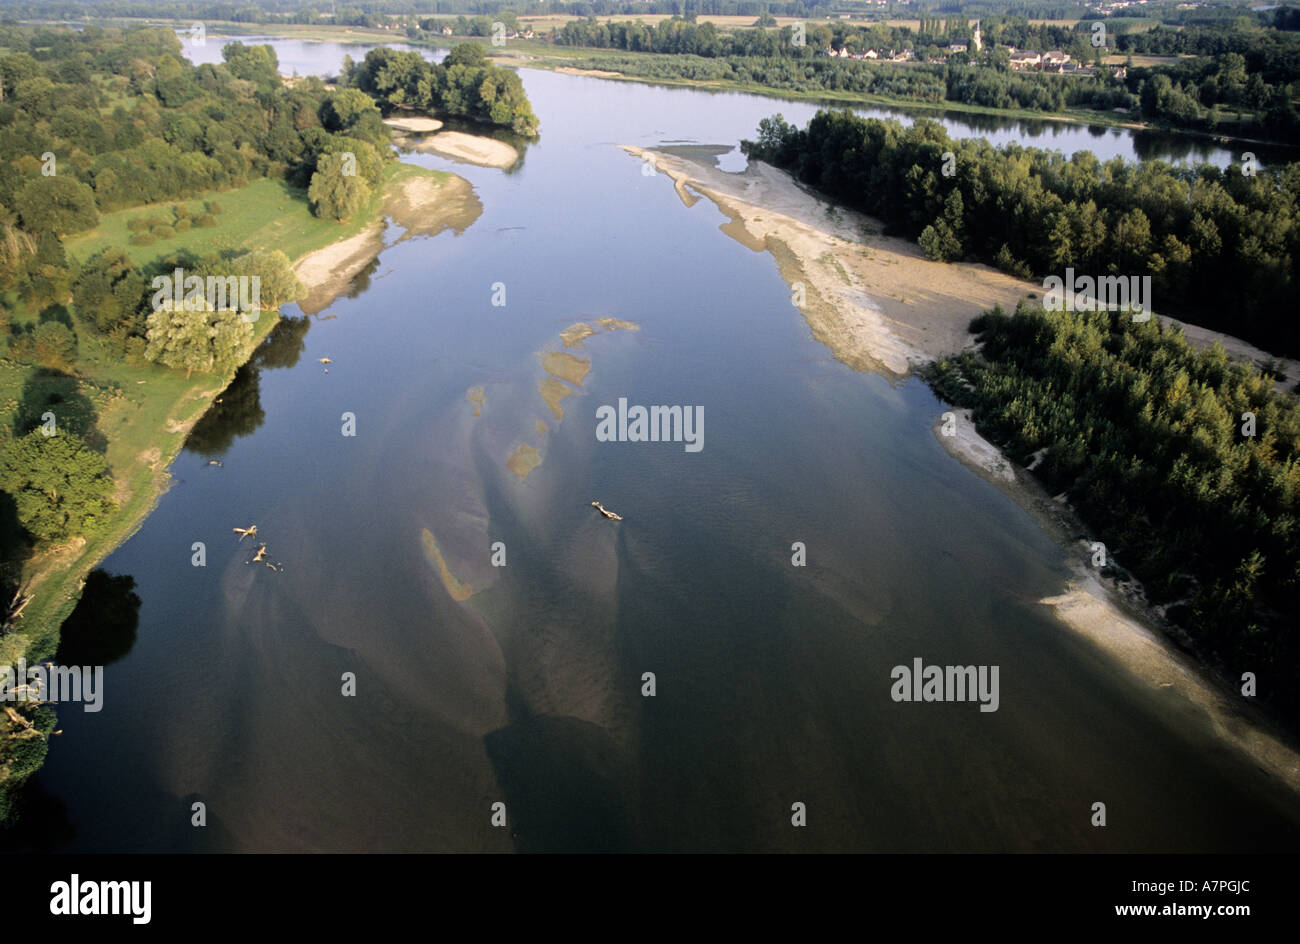 France, Indre et Loire, the Loire river close to Amboise (aerial view) Stock Photo